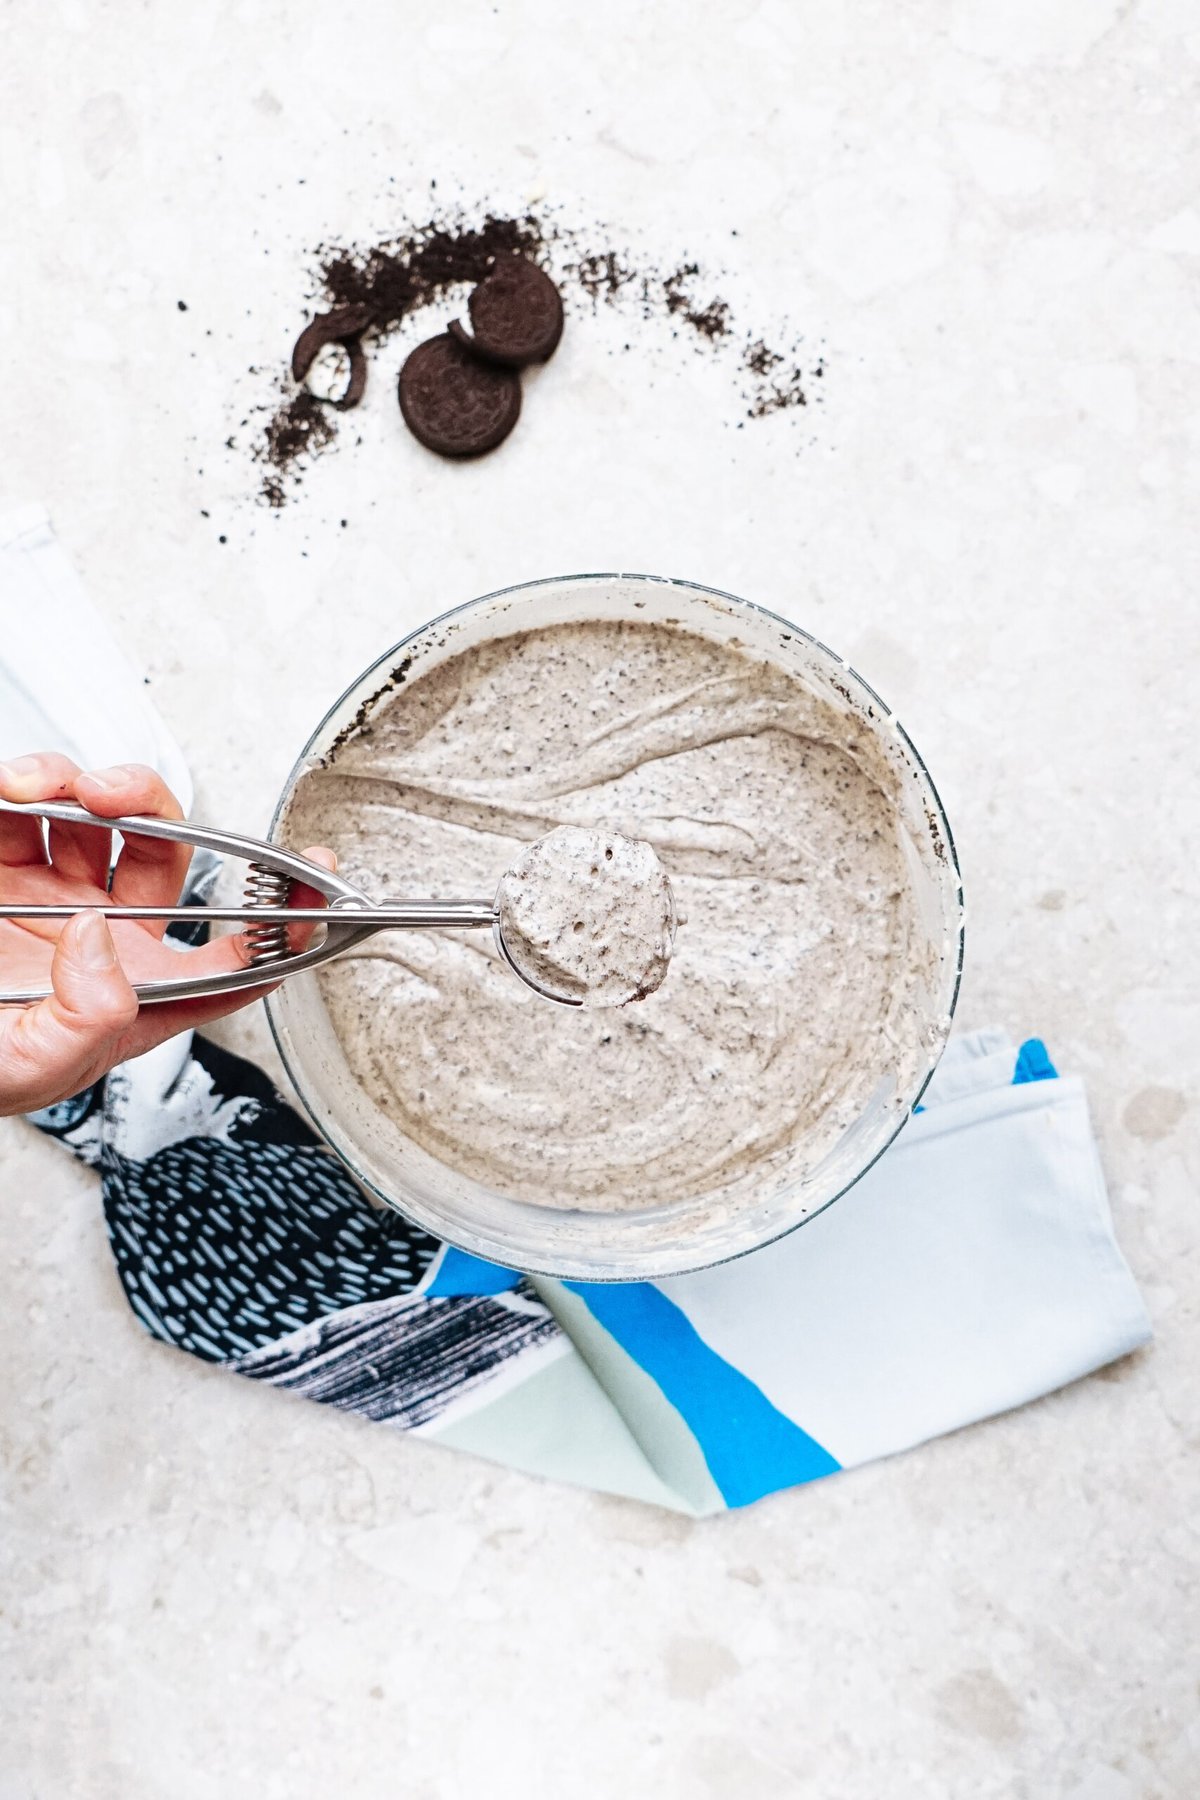 A hand using a scoop to take some cookies and cream batter from a bowl. Napkins and cookie crumbs are scattered on the surface around the bowl.